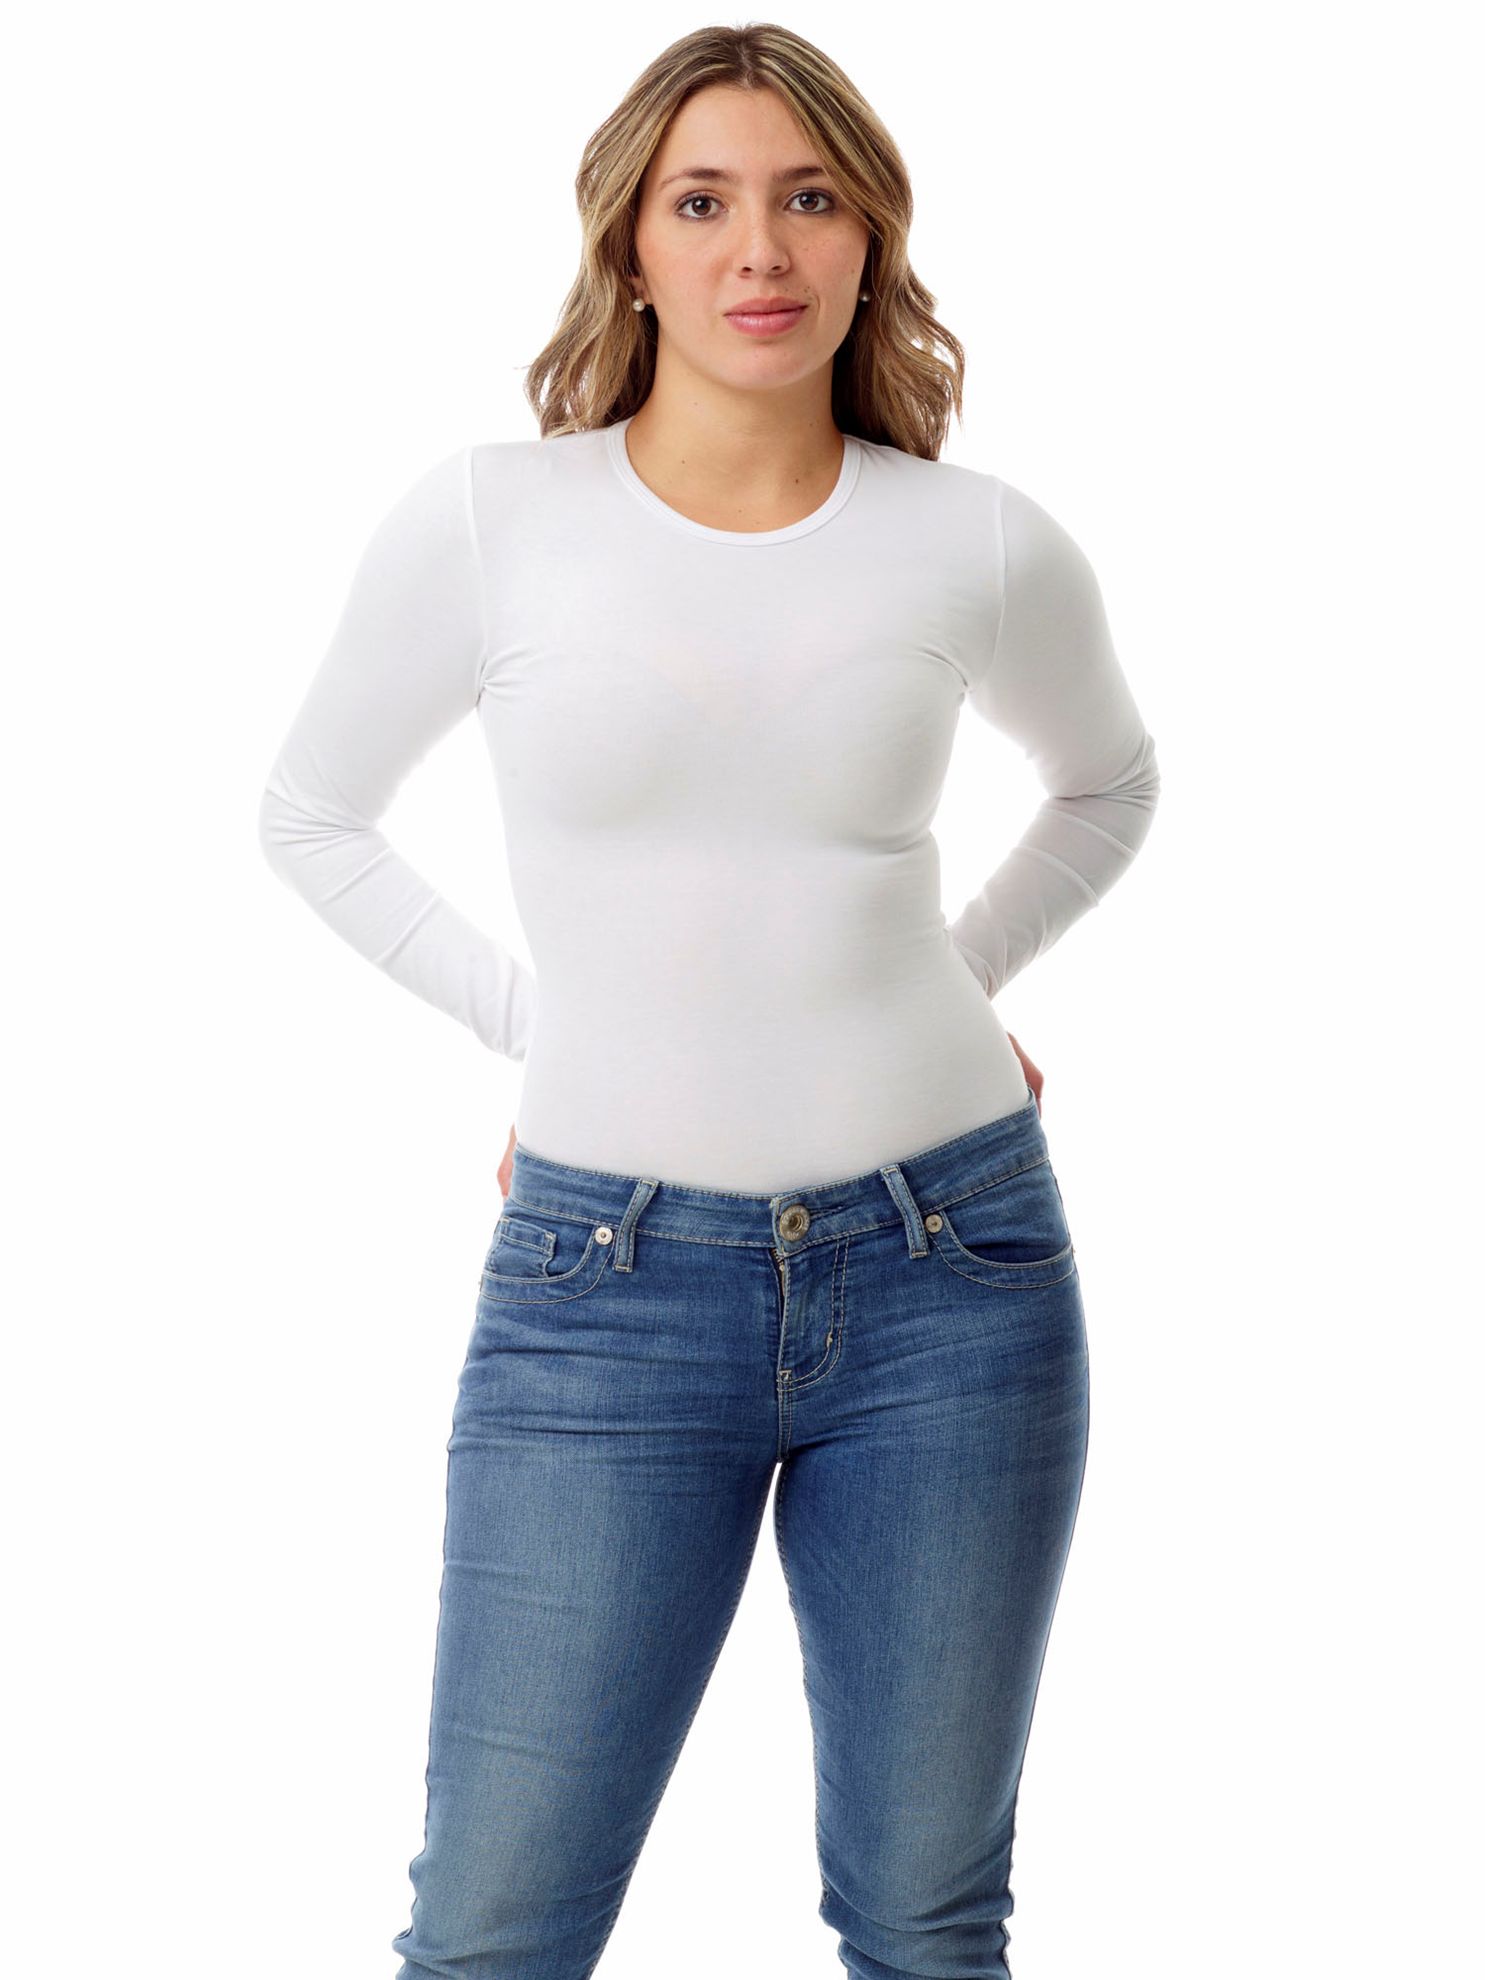 Women's Cotton Spandex Compression Crew Neck Top Long Sleeves. Men  Compression Shirts, Girdles, Chest Binders, Hernia Garments